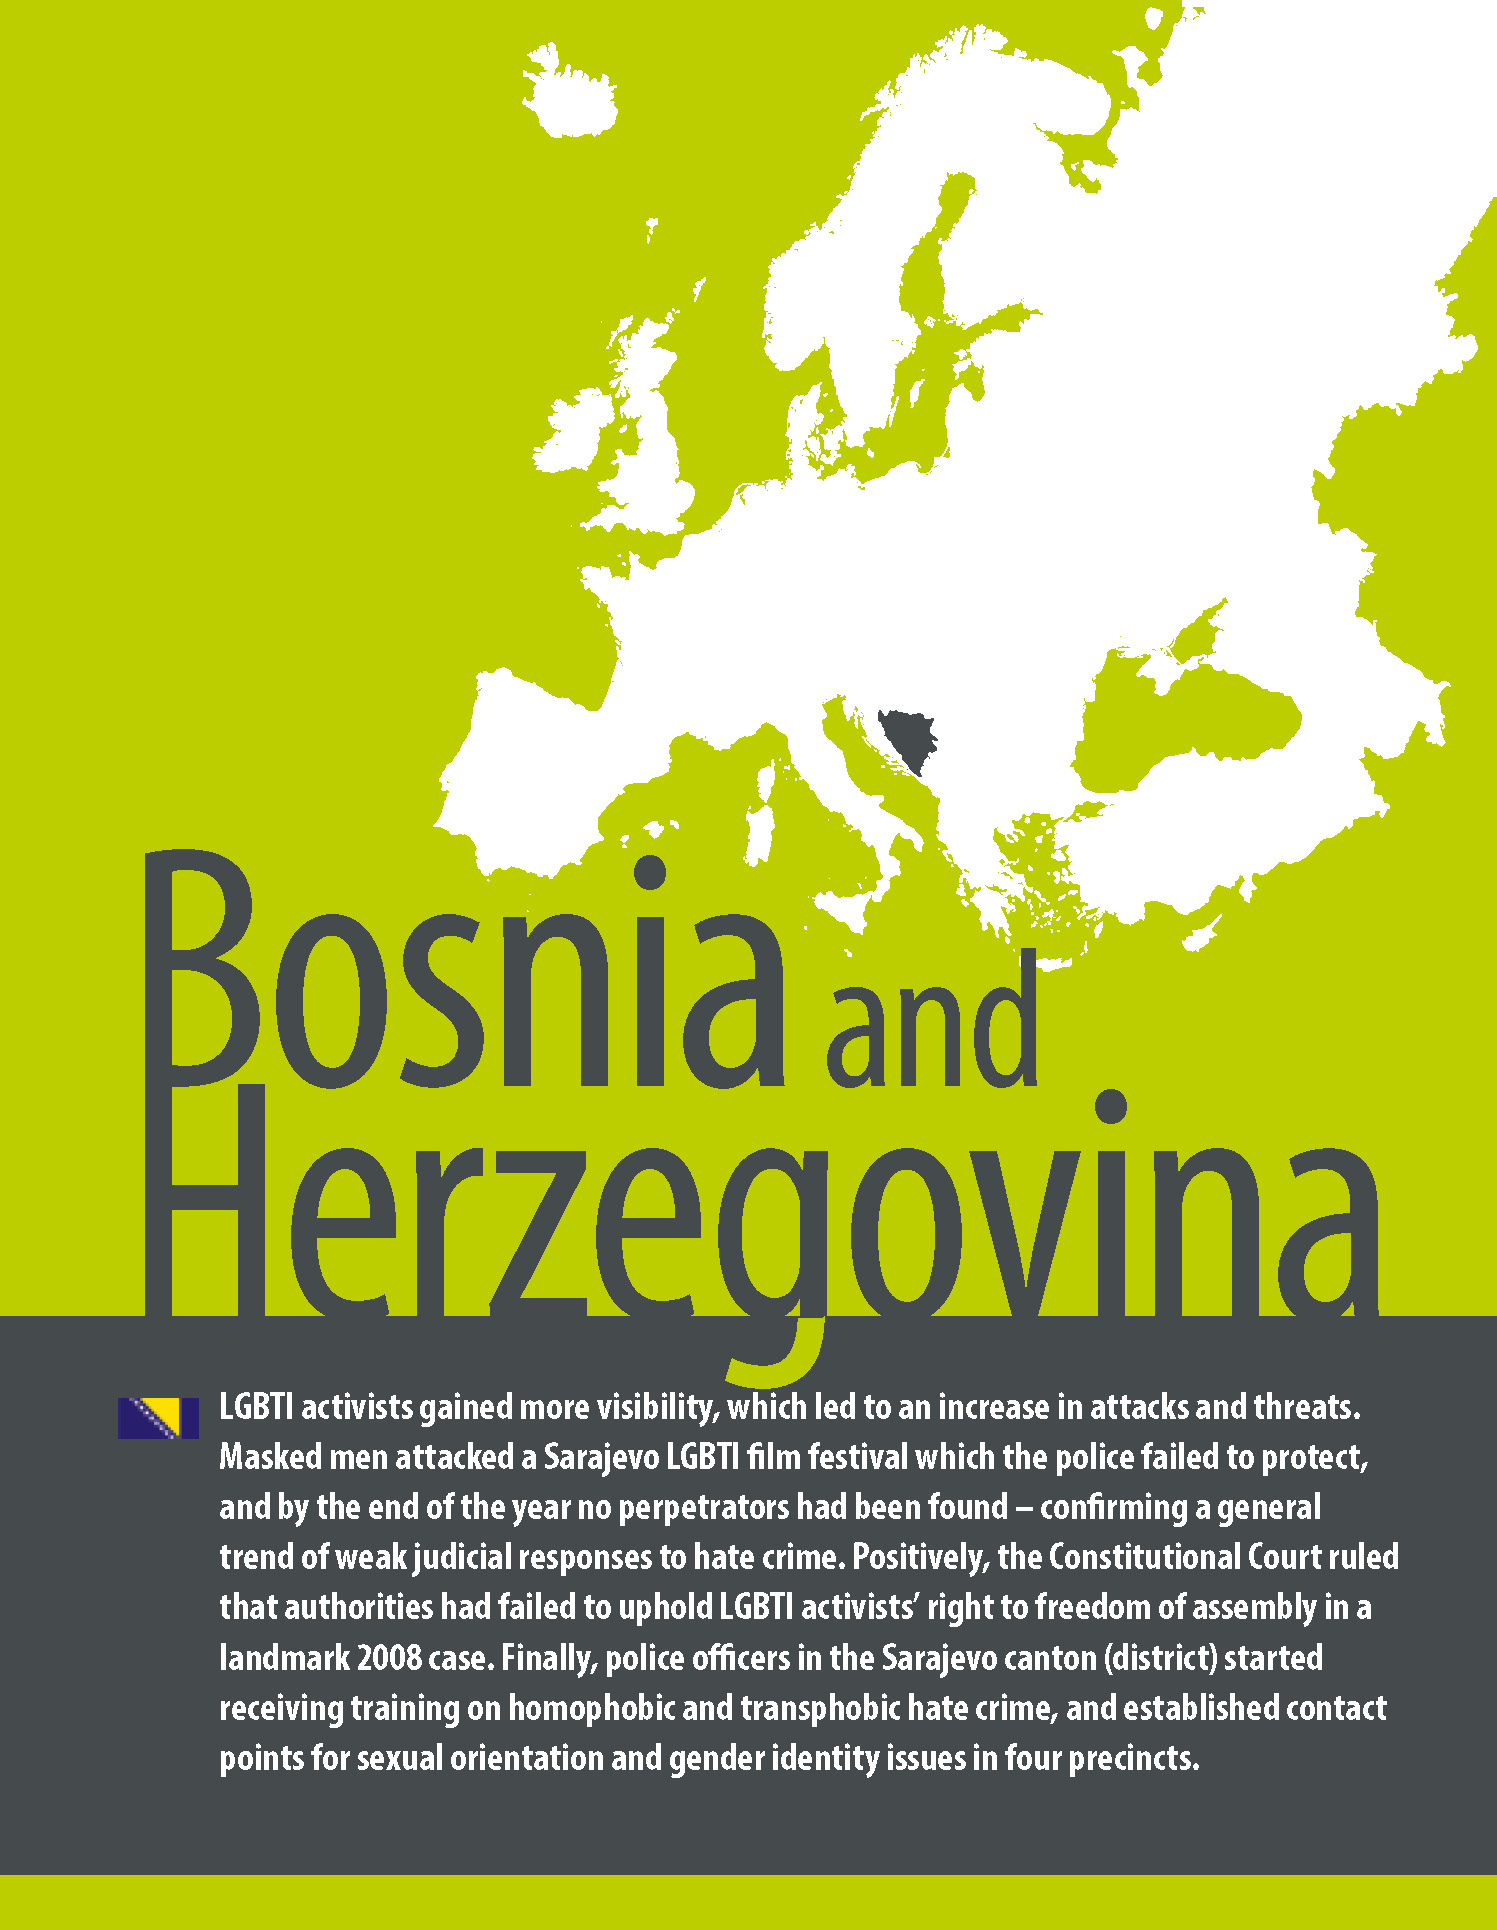 annual_review_2015_bosnia and herzegovina_Page_1